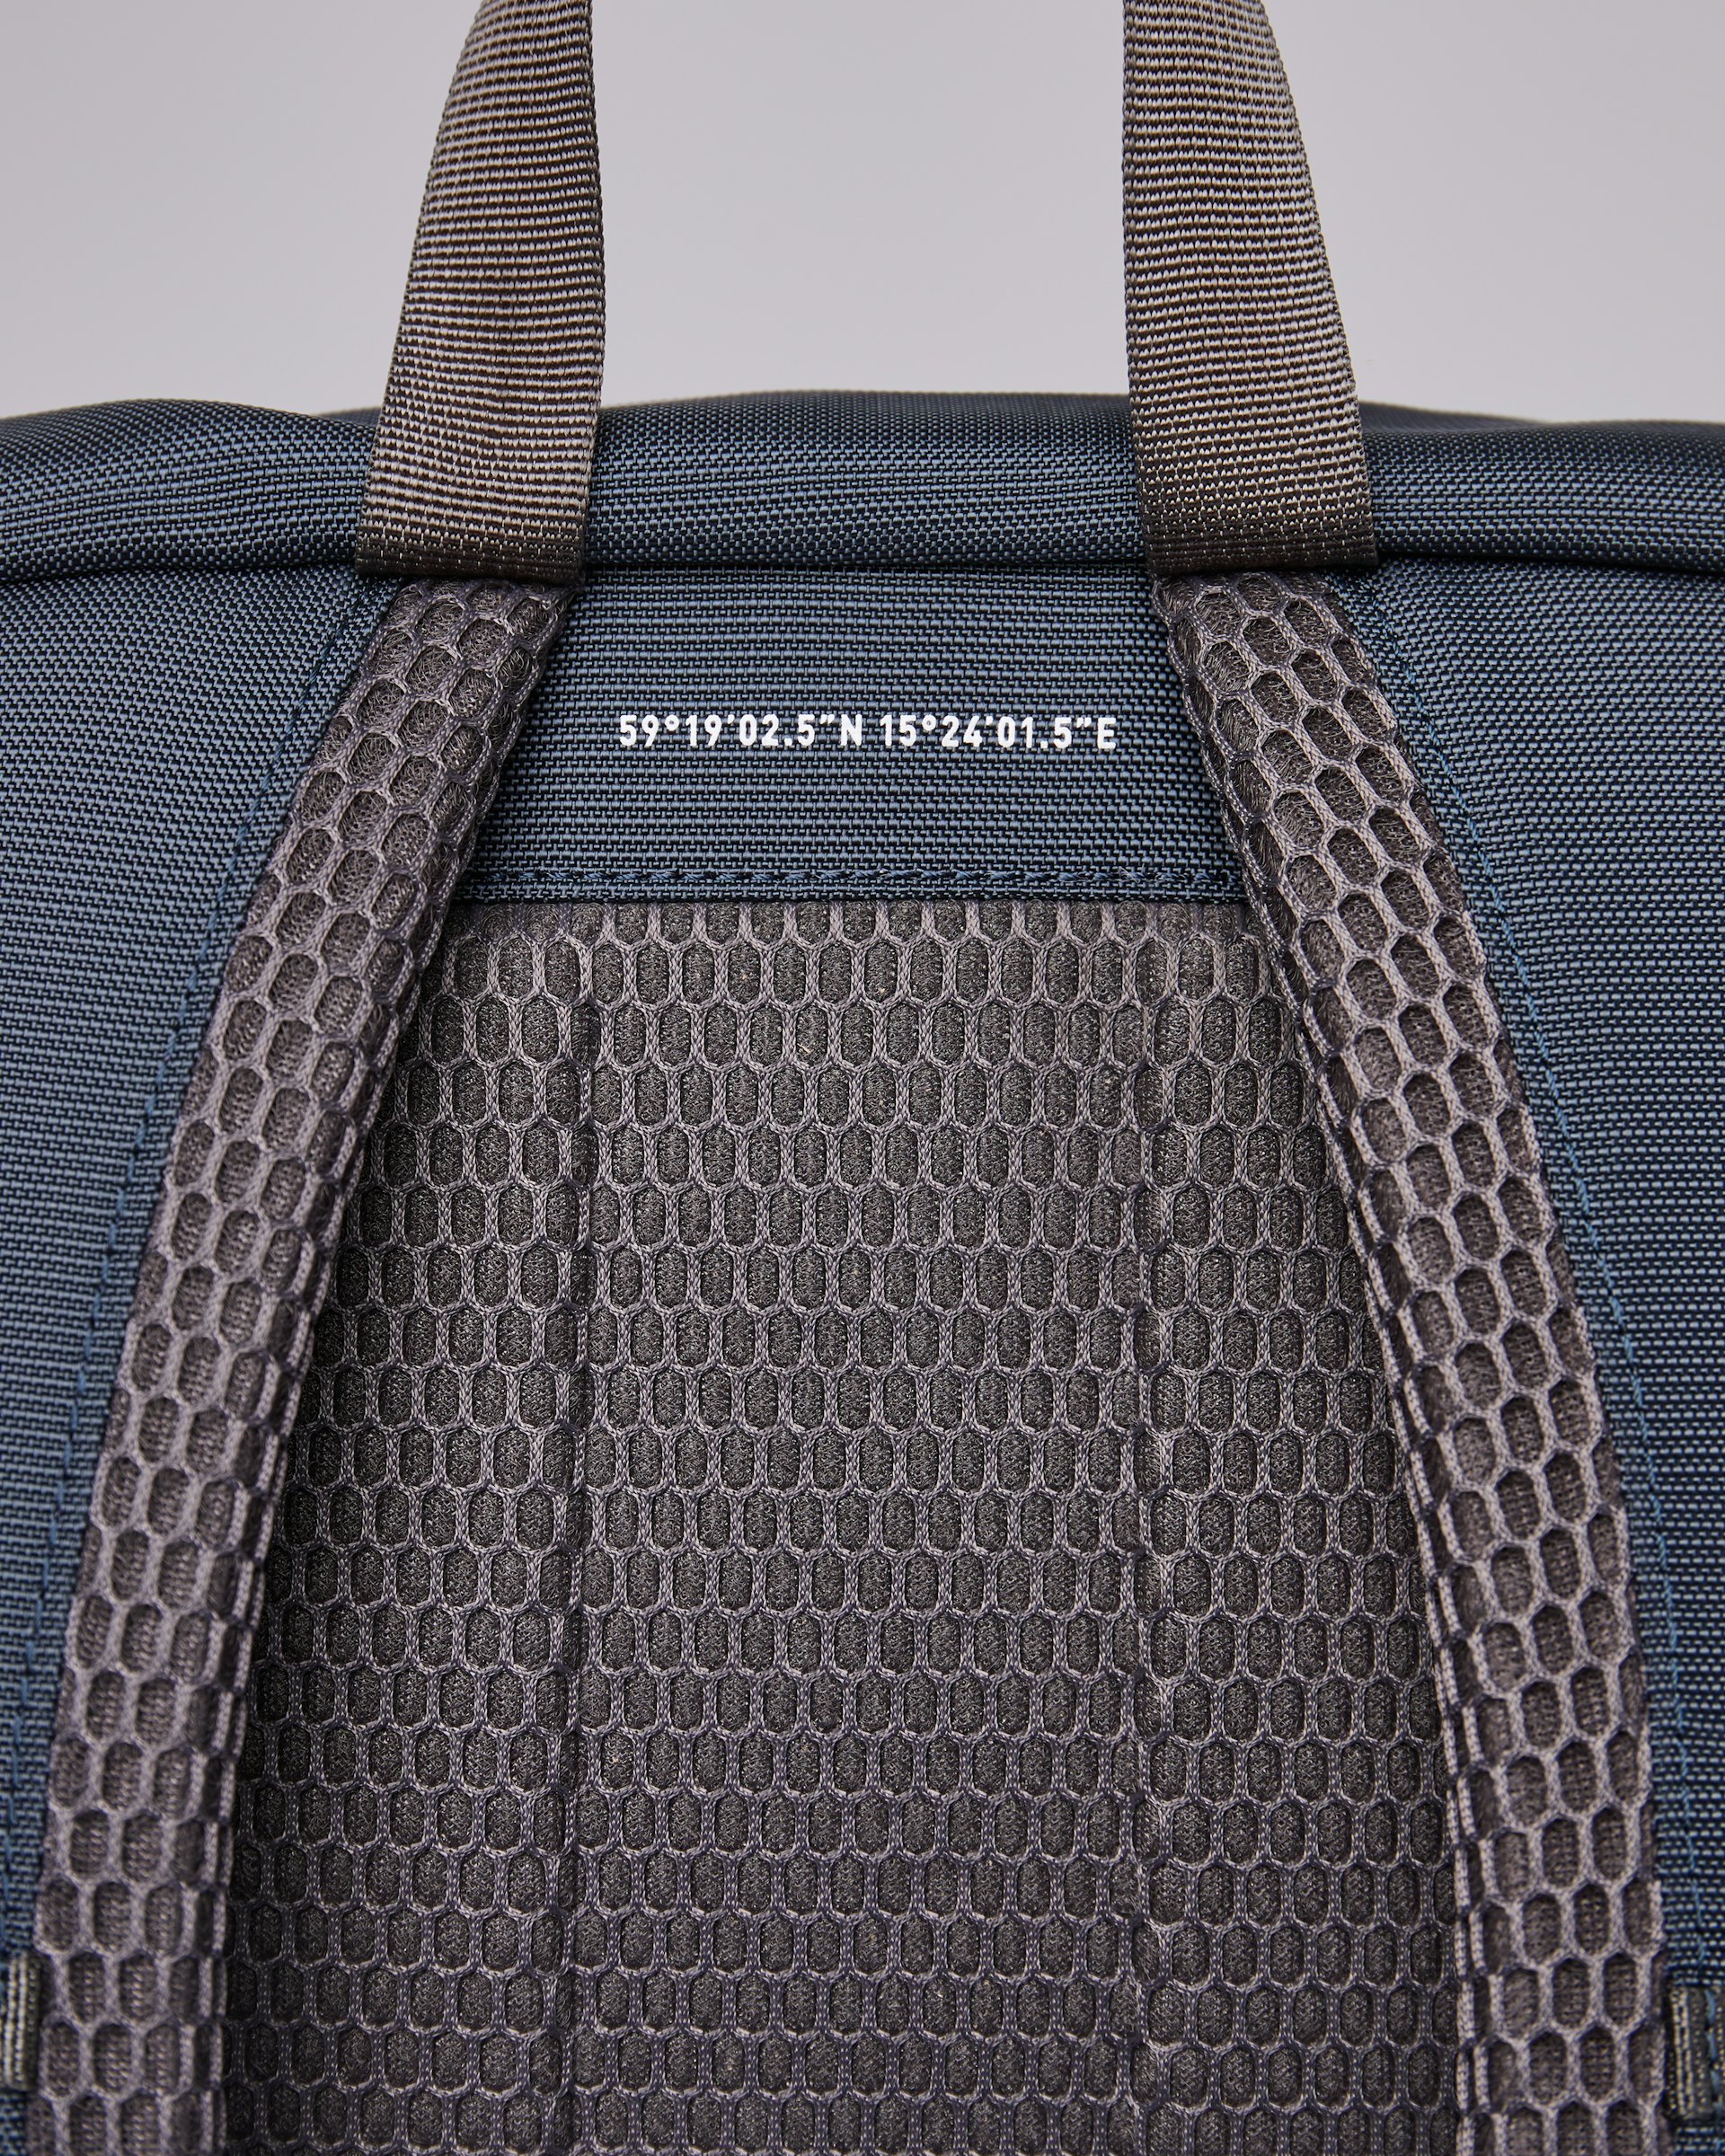 Valley Hike belongs to the category Backpacks and is in color steel blue & navy (4 of 7)